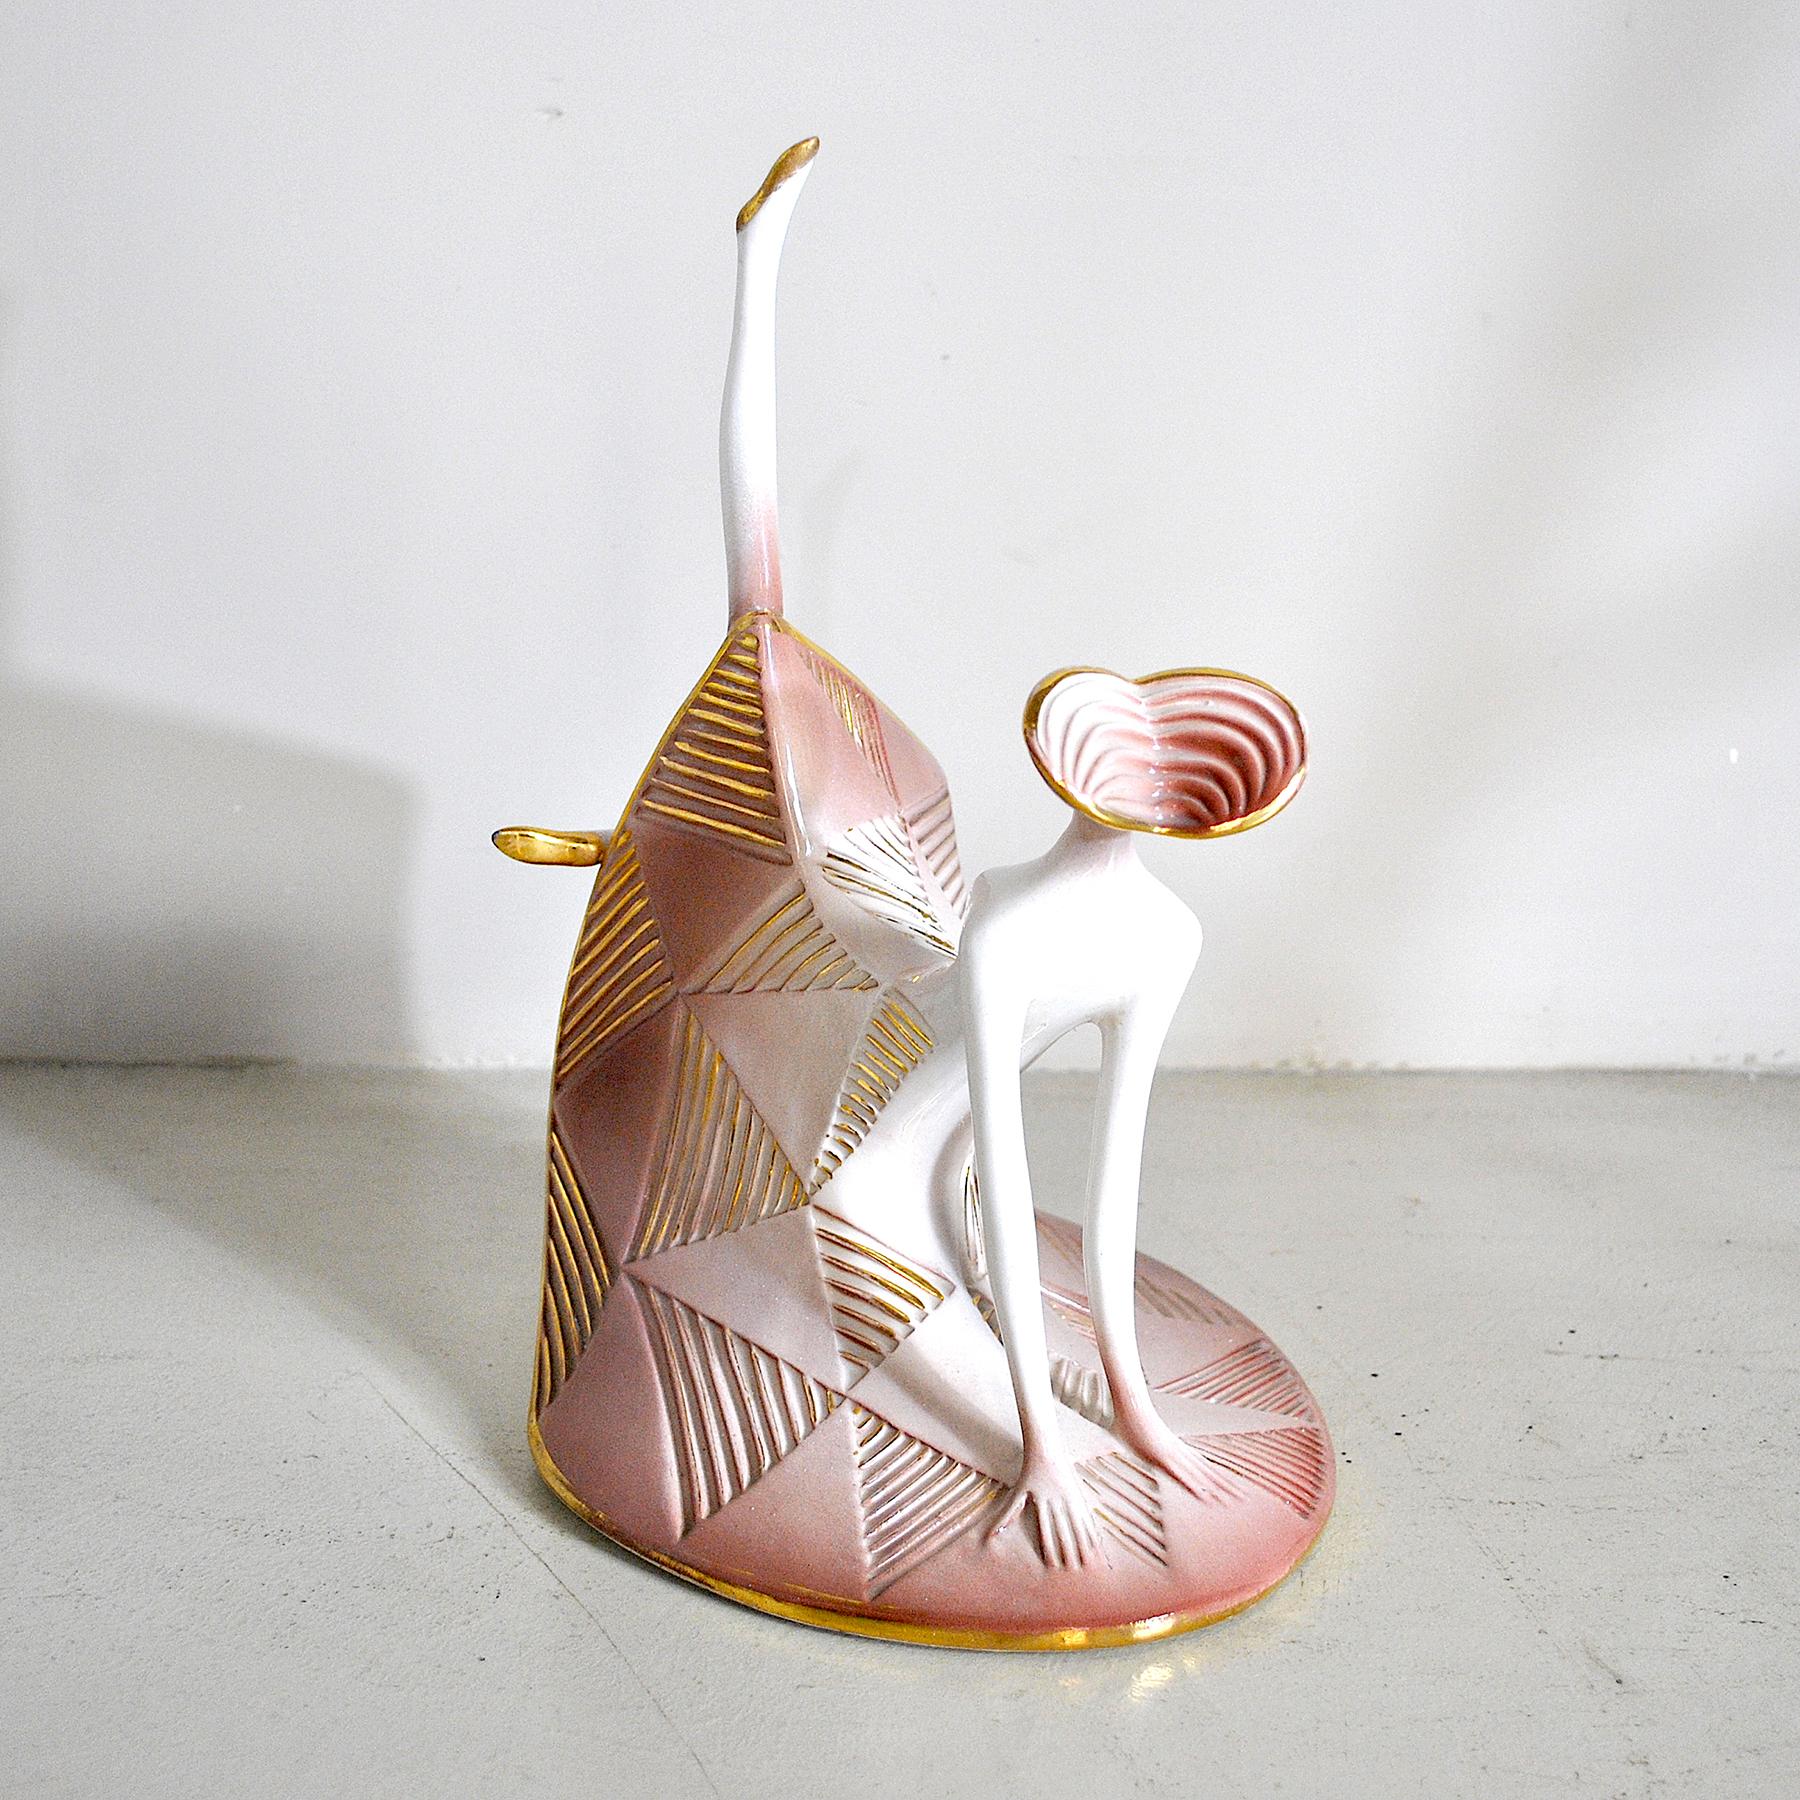 Mid-20th Century Art Déco Polychrome Ceramic Dancer from the 1930s